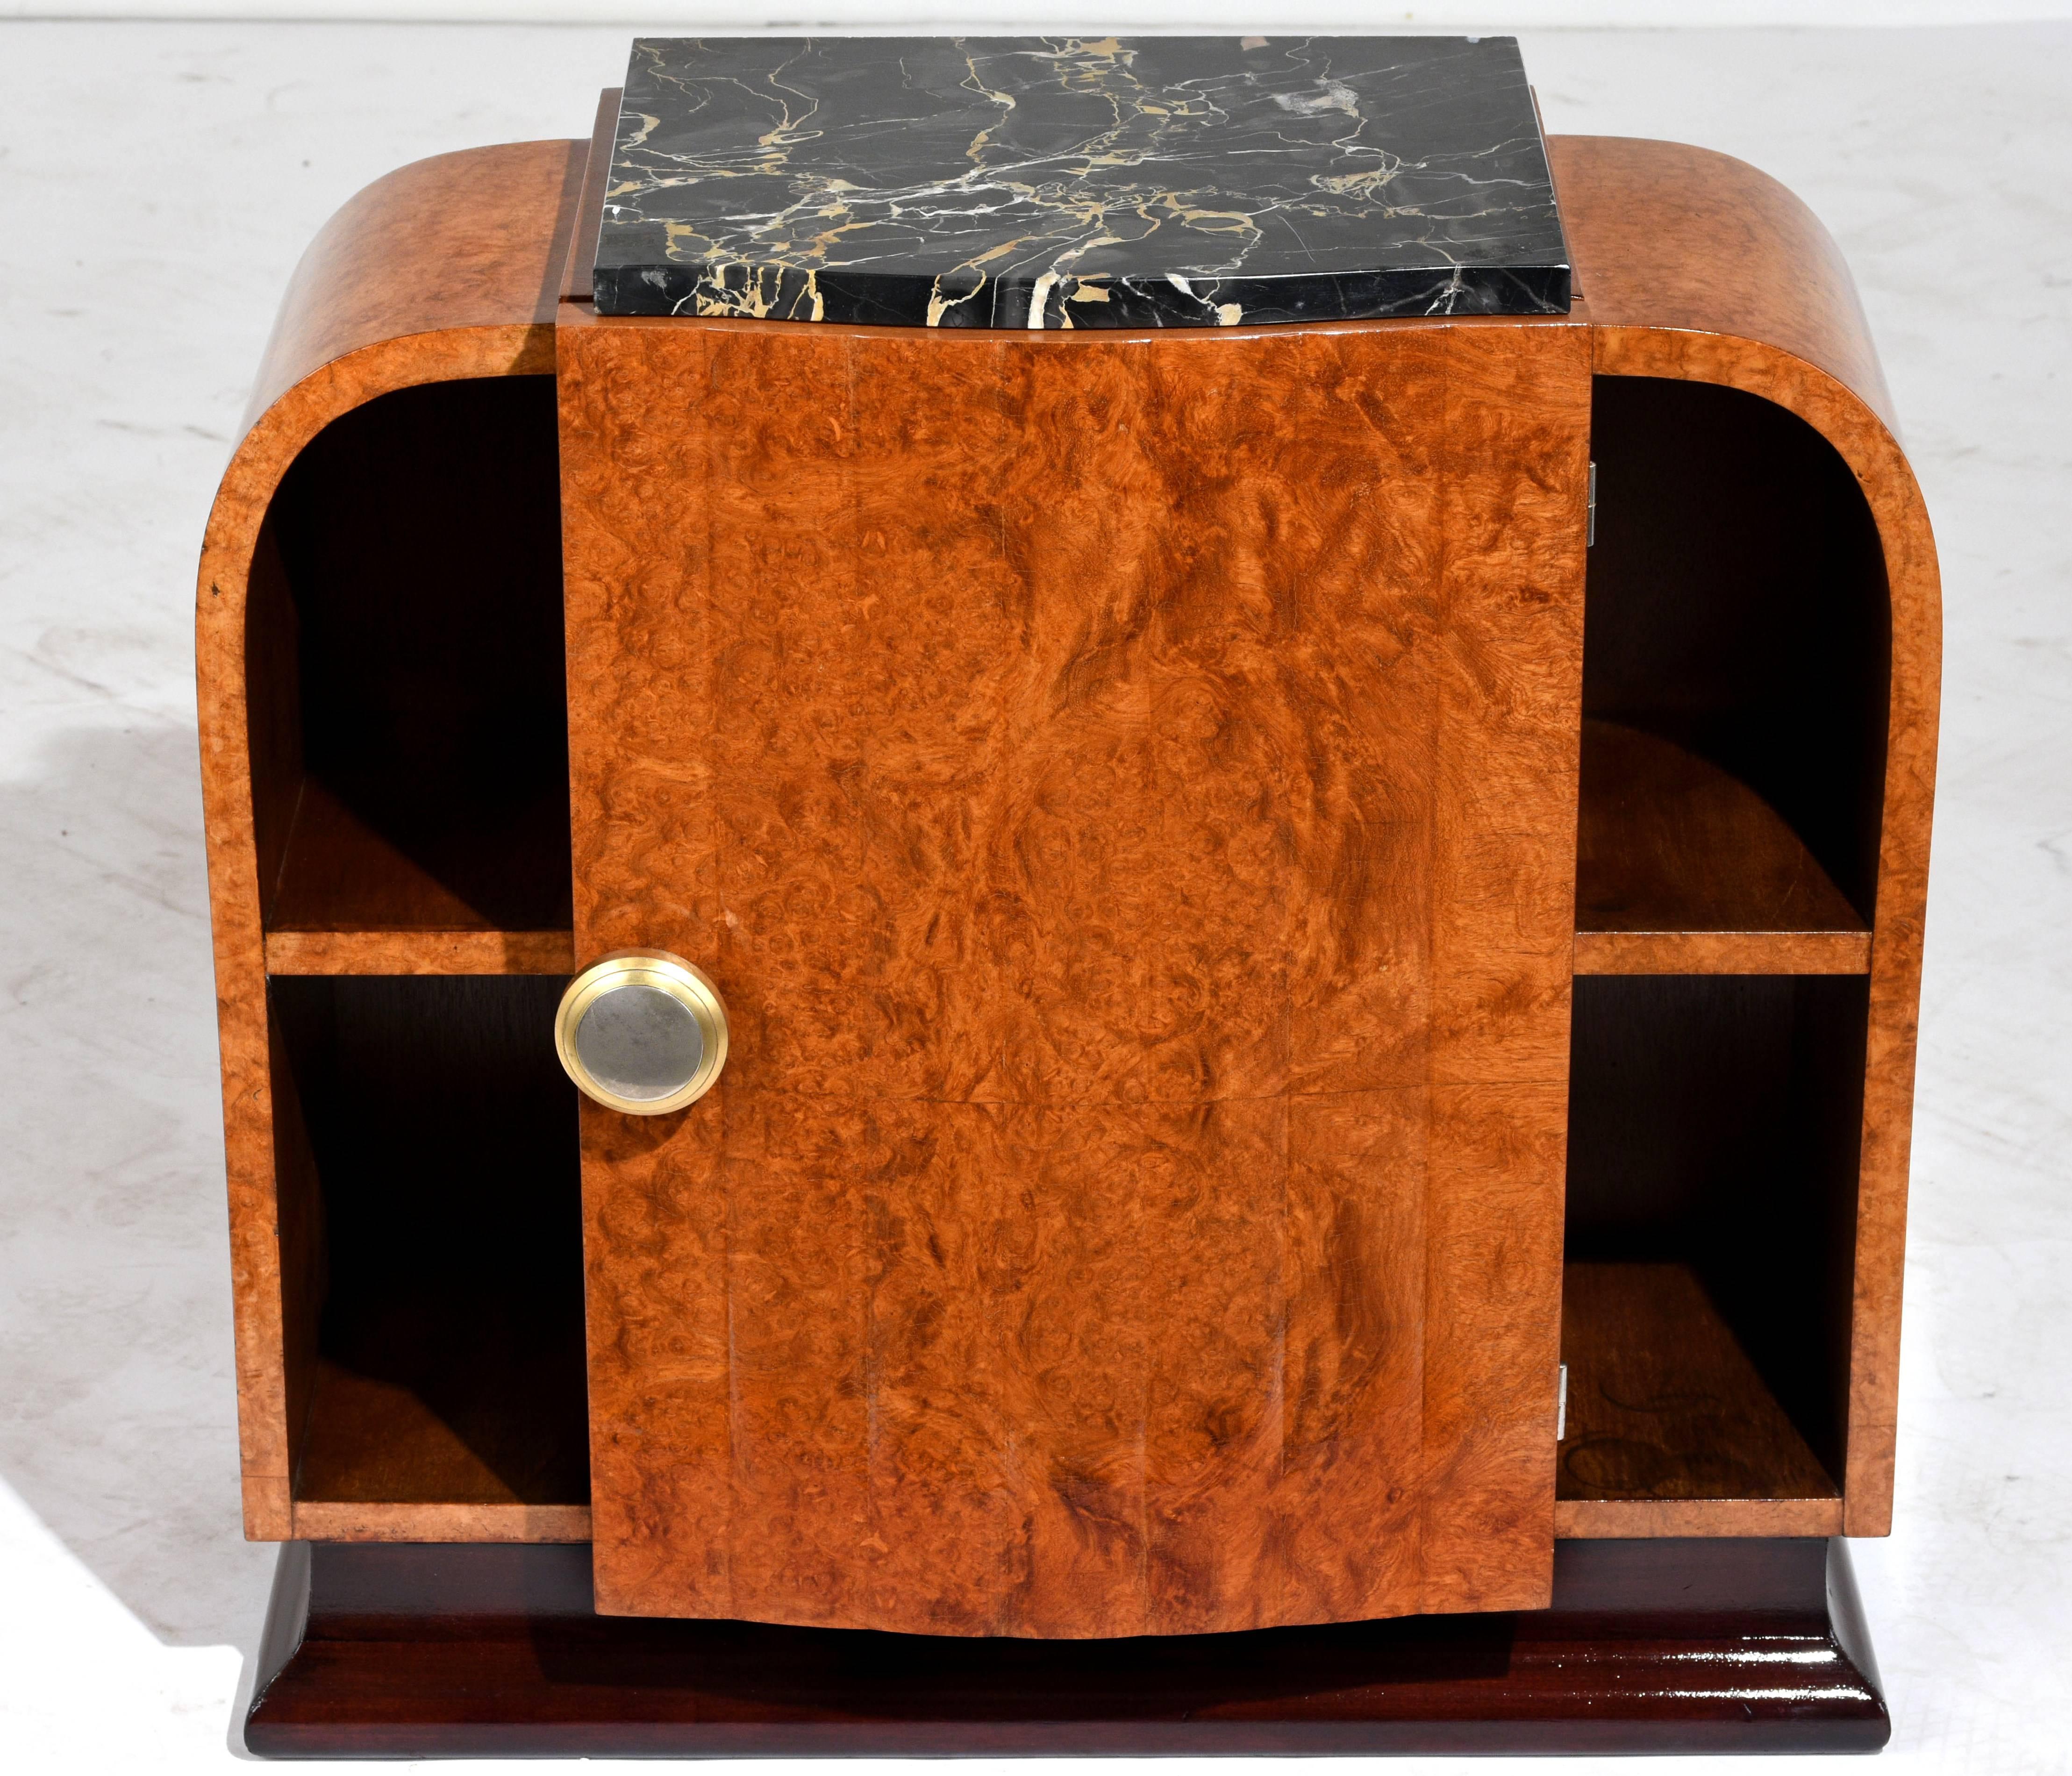 This 1930s French Art Deco-style nightstand is made from wood finished in a walnut color. The front and sides feature sleek lines and curved edges and are adorned with burled walnut wood veneers. The top features a black marble section with white